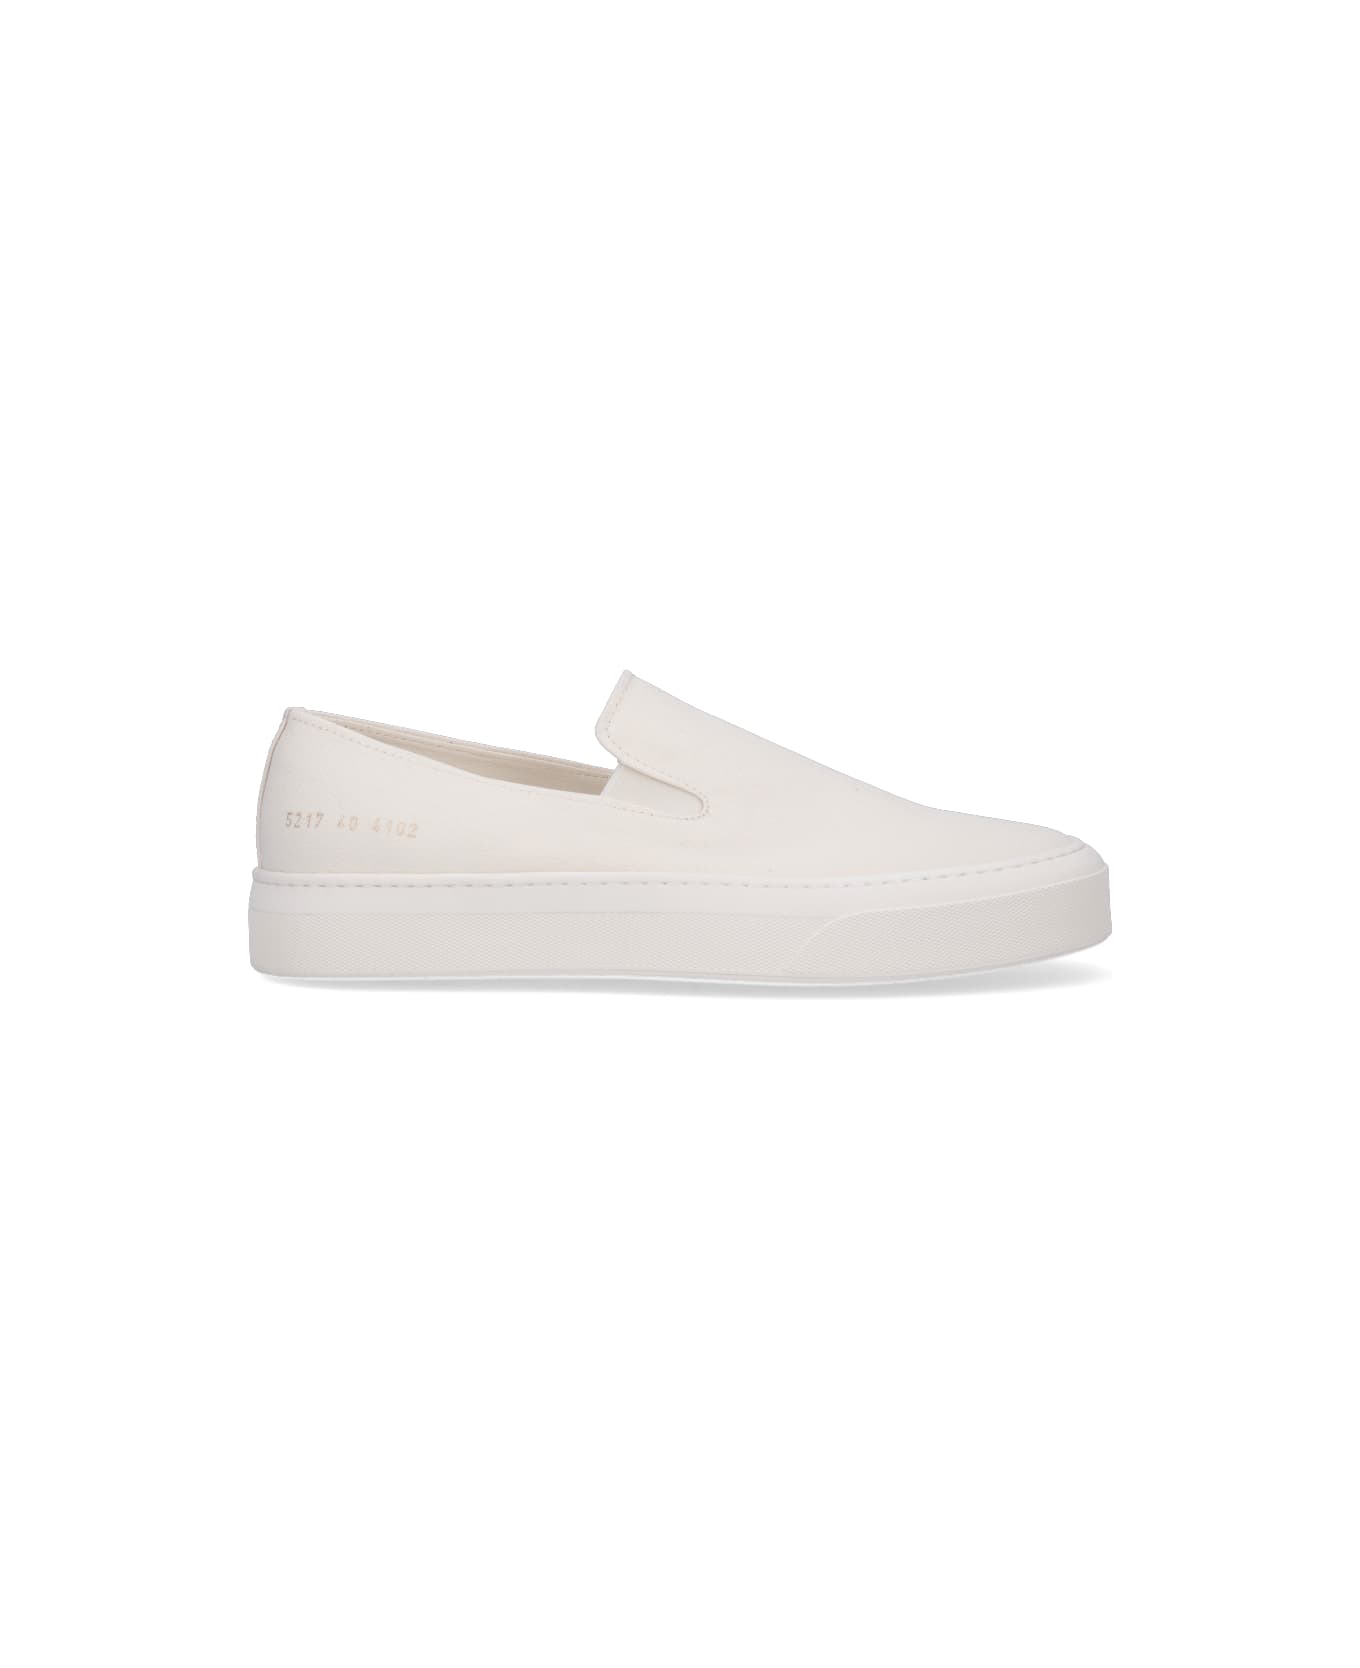 Common Projects Sneakers - Cream